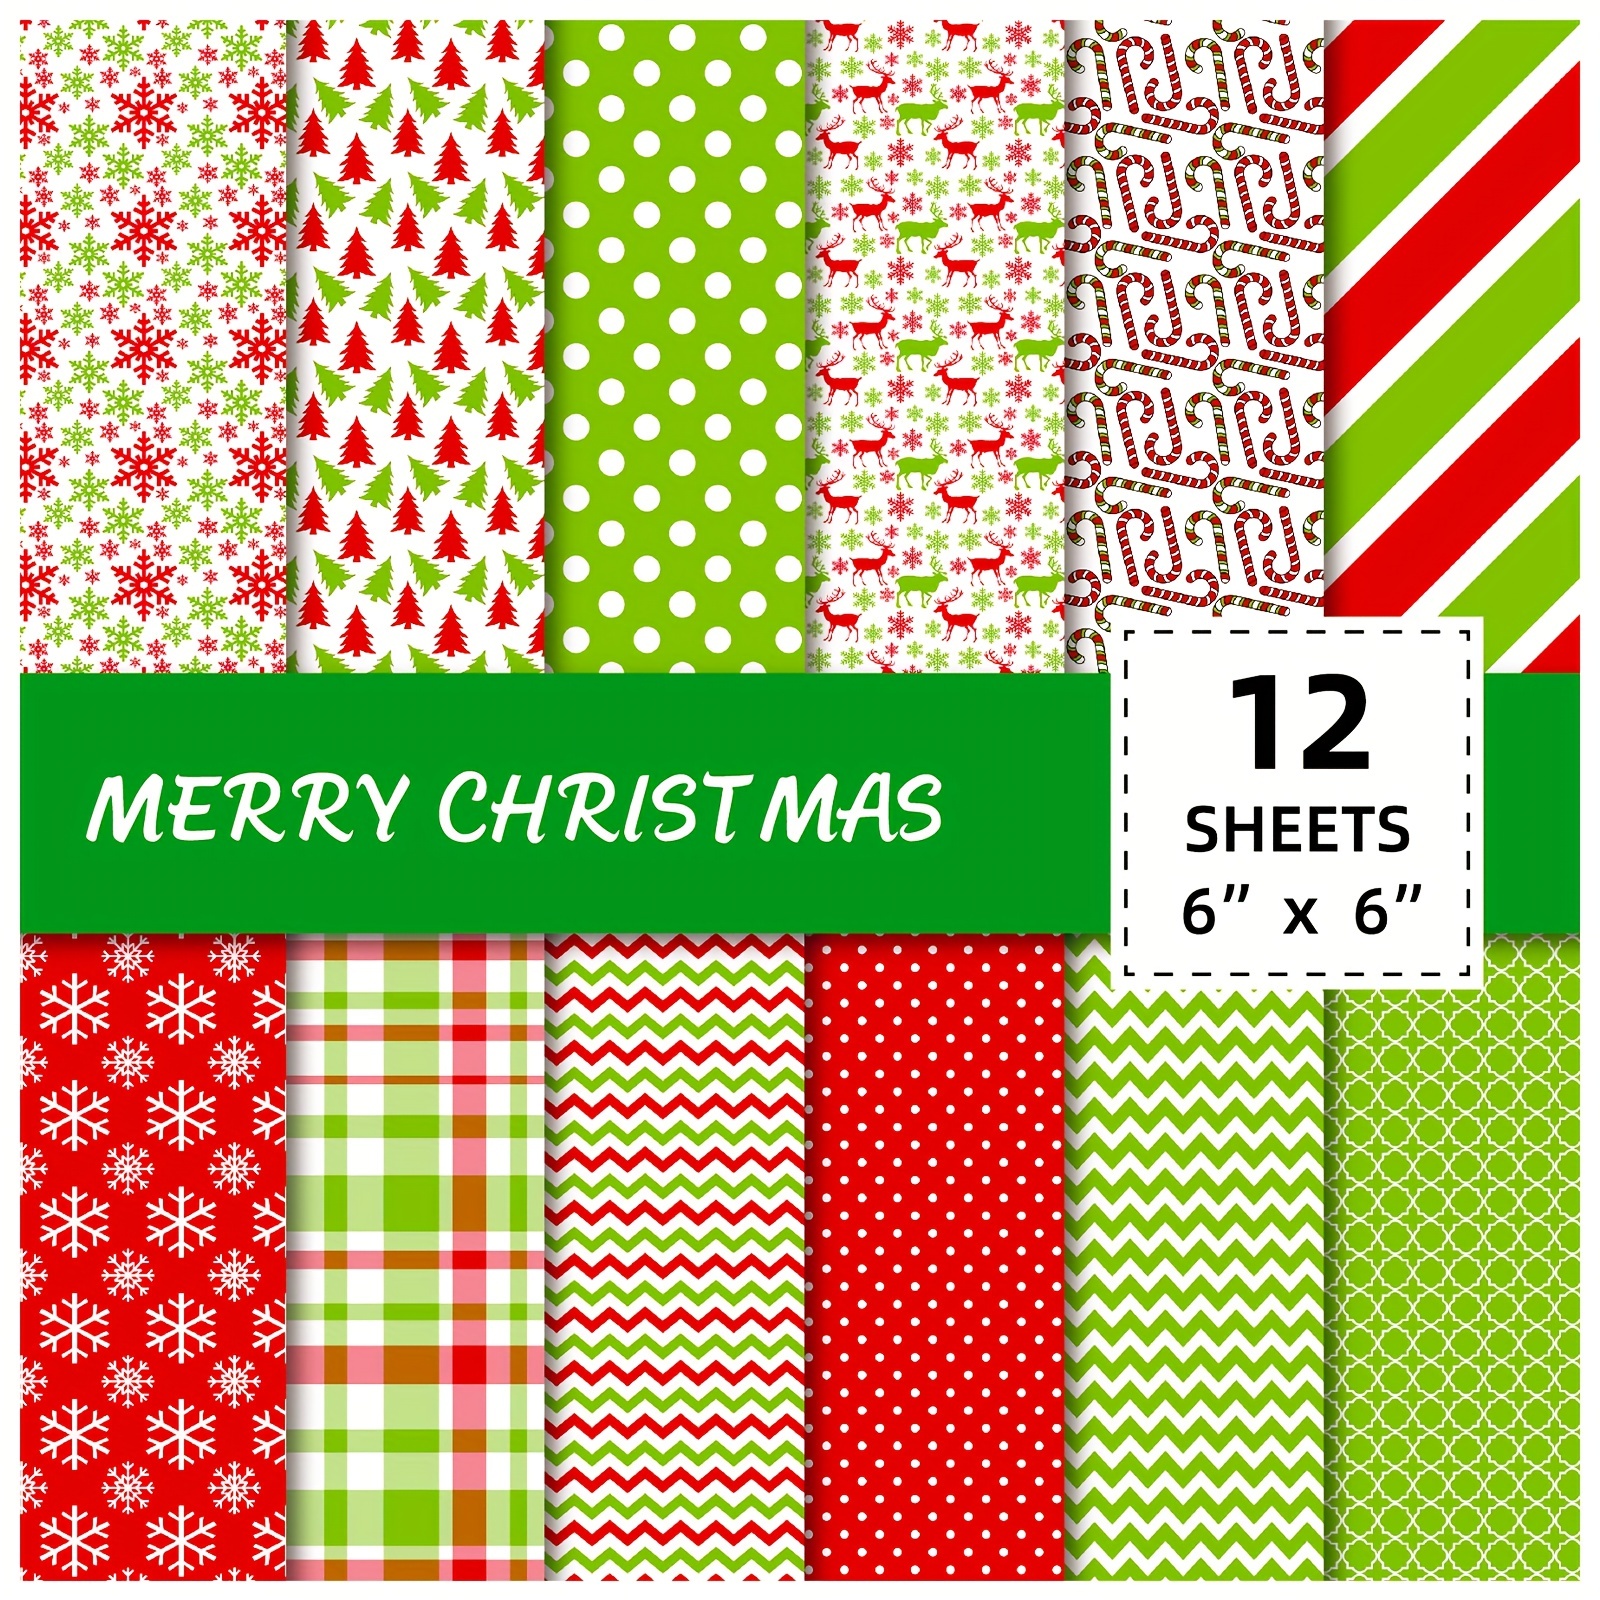 Winter/christmas Cardstock, Patterned Paper, Junk Journal, Mixed